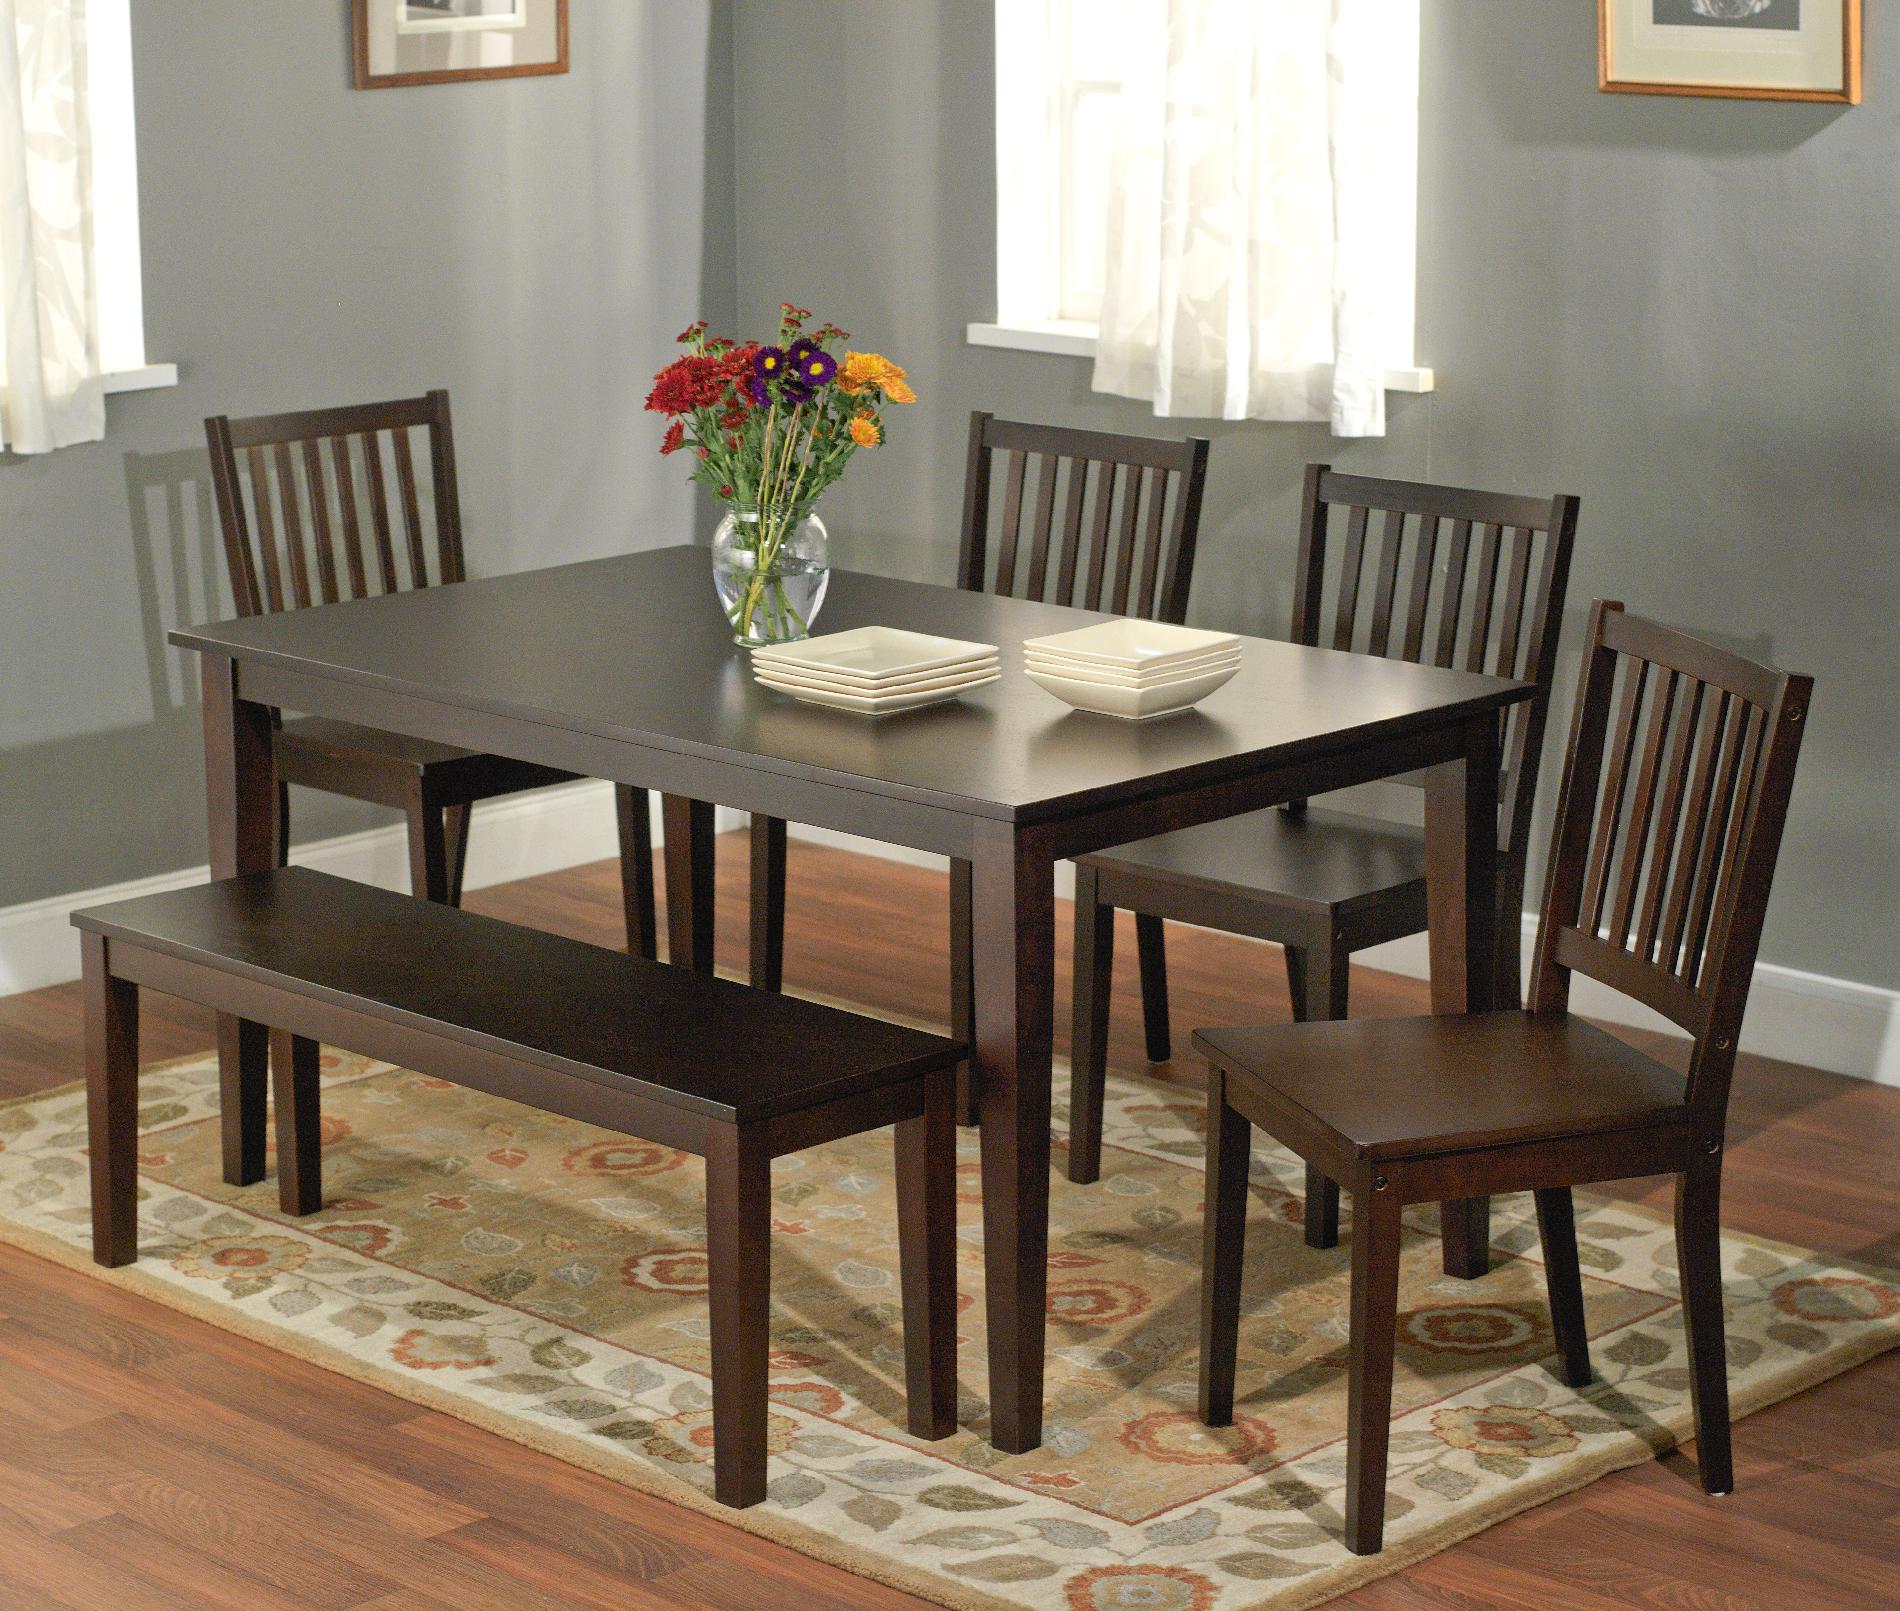 6pc Shaker dining set with Bench